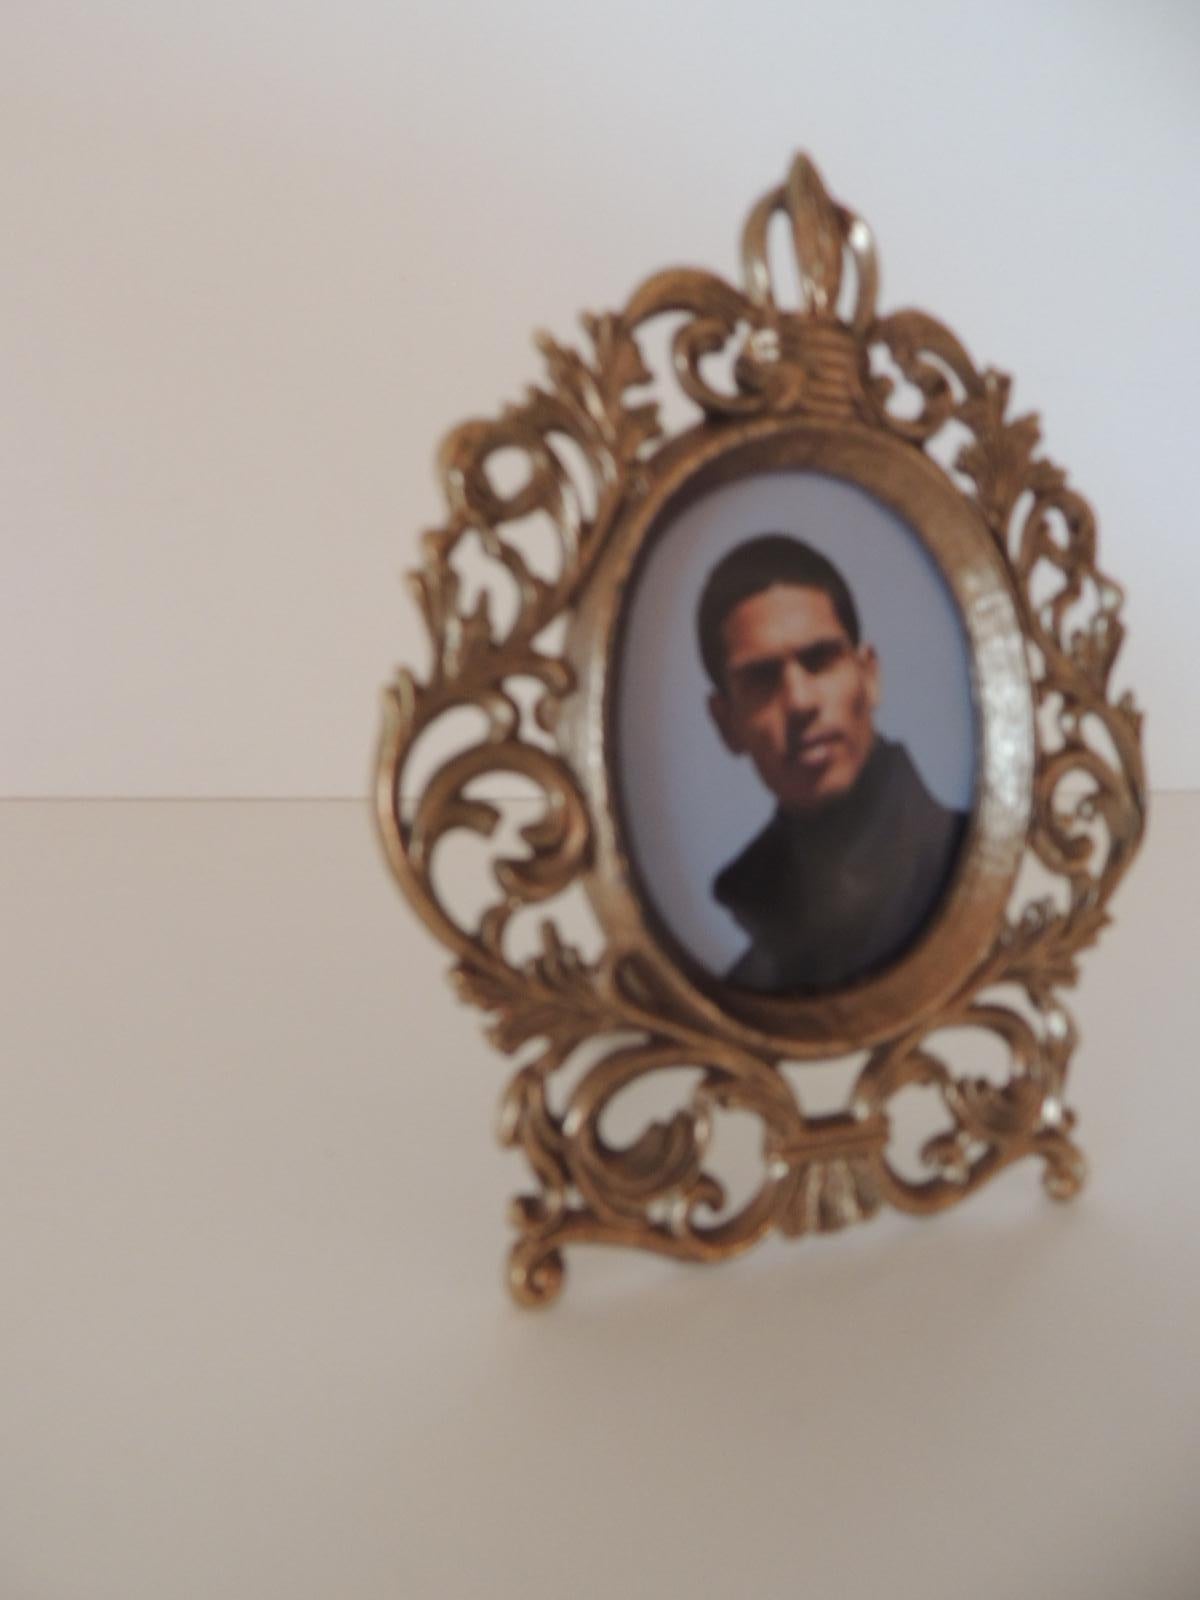 Small round brass decorative picture frame.
Size: 3.5